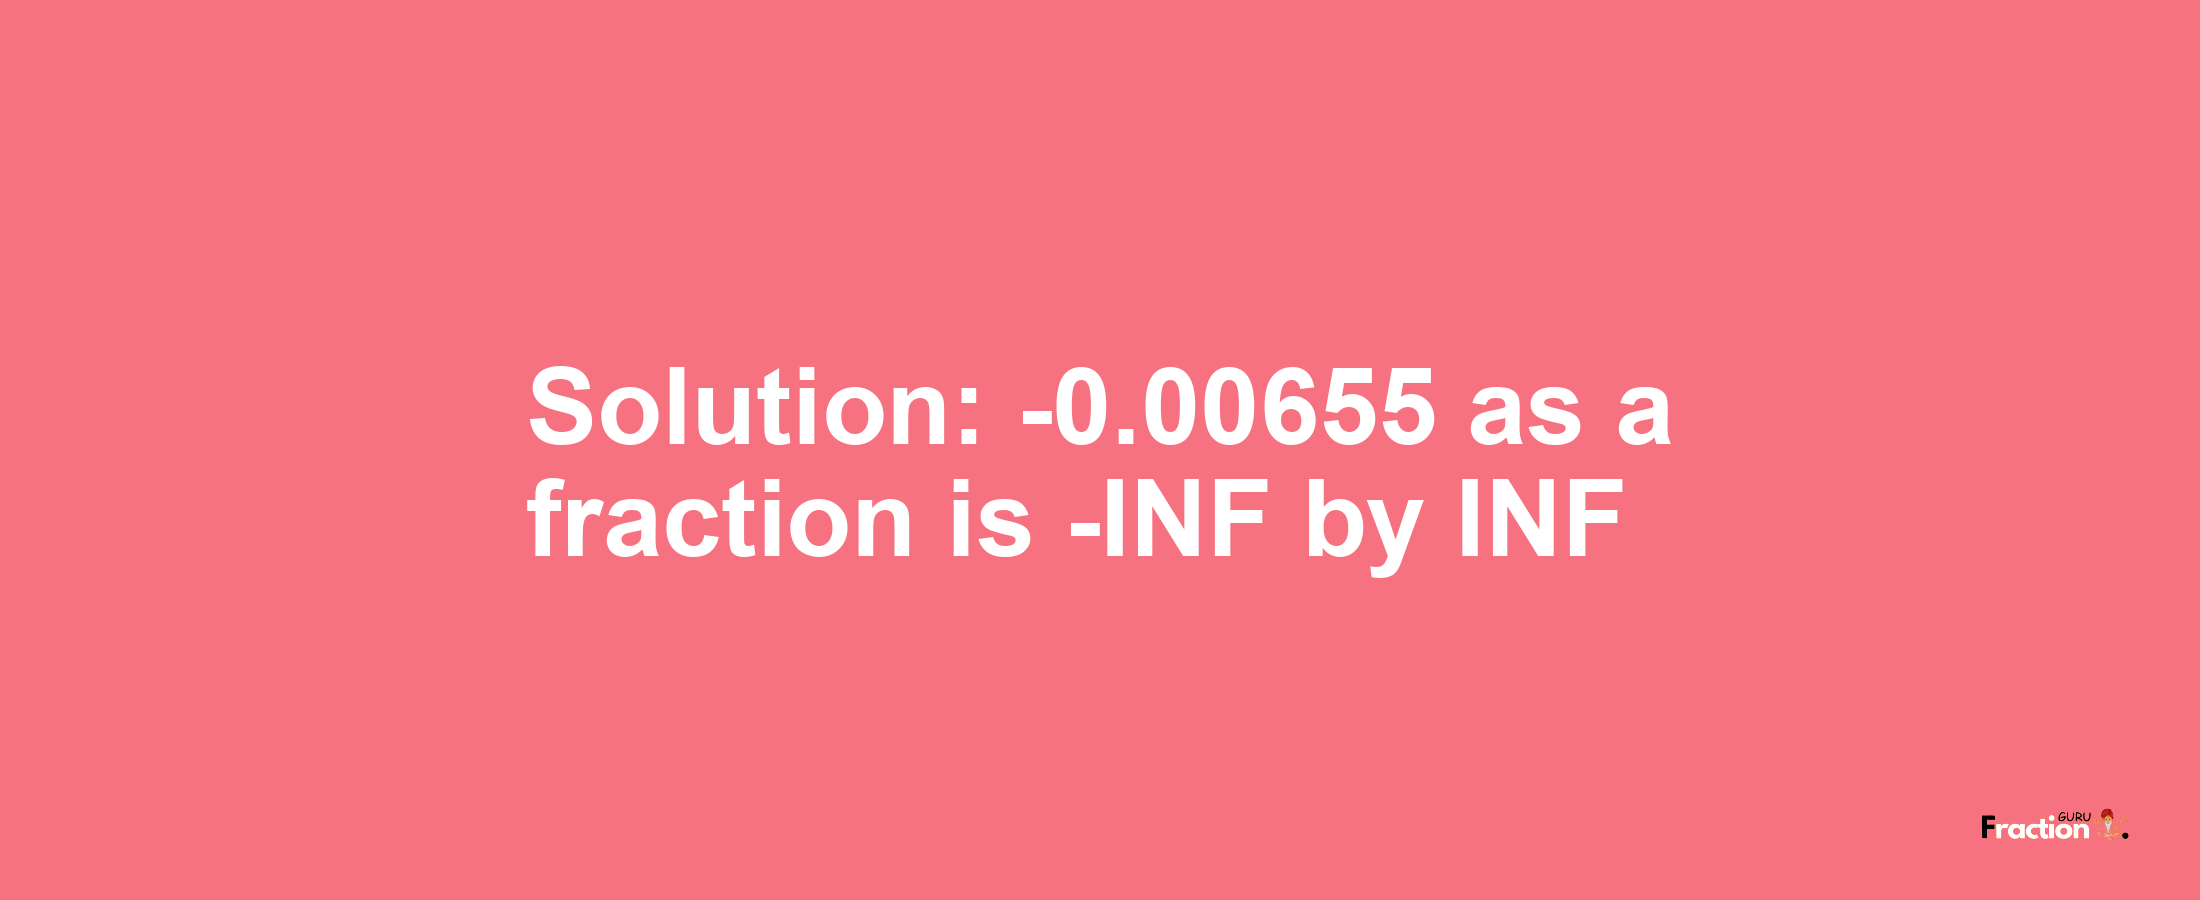 Solution:-0.00655 as a fraction is -INF/INF